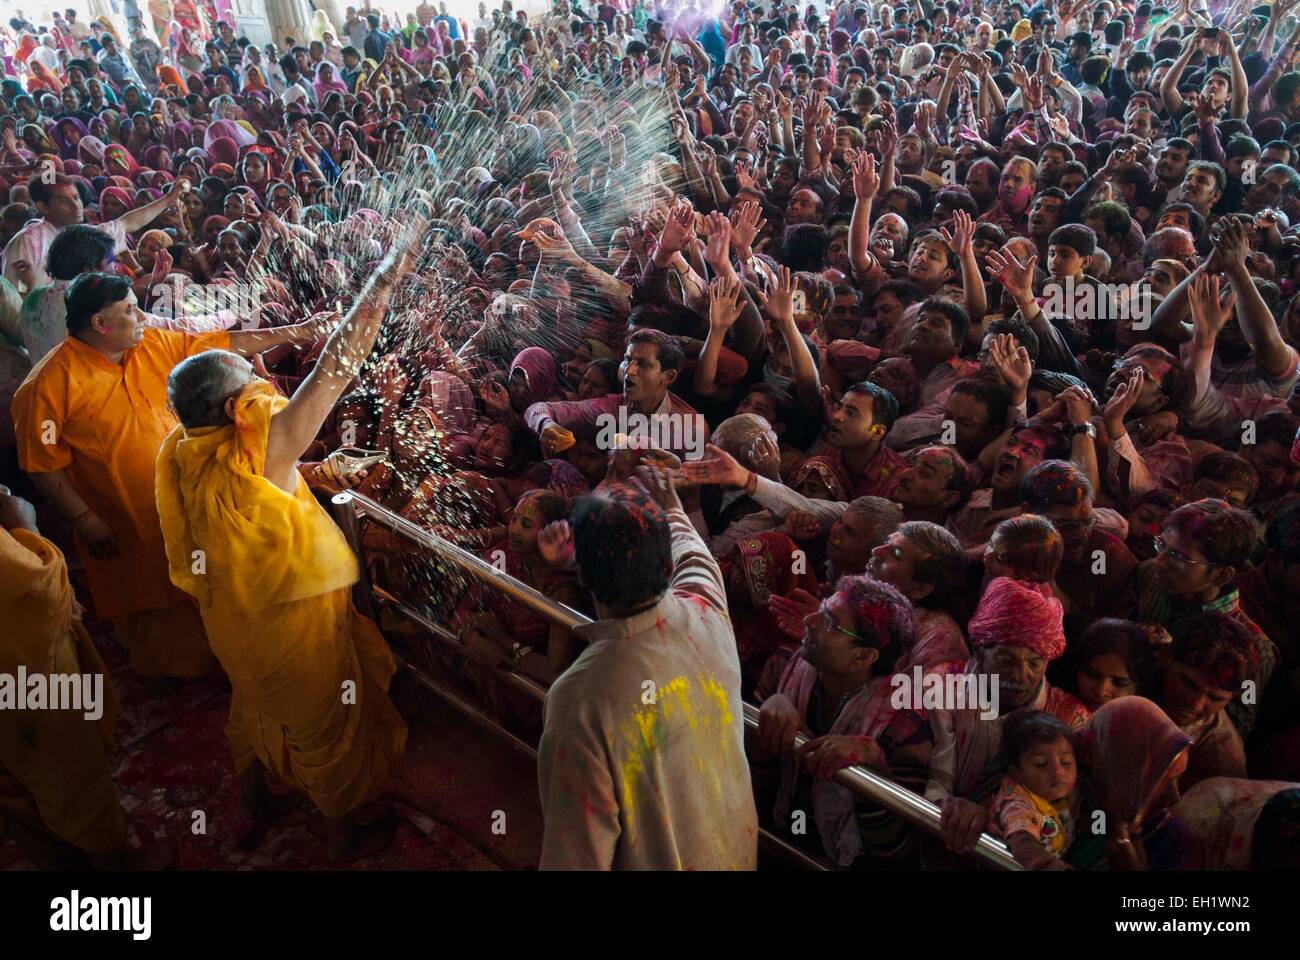 Jaipur, India. 5th Mar, 2015. Indian Hindu devotees celebrate the Holi festival at the Govind Dev Ji temple in Jaipur, India, March 5, 2015. The tradition of Holi, also known as the festival of colors, is celebrated to mark the beginning of spring season. Credit:  Tumpa Mondal/Xinhua/Alamy Live News Stock Photo